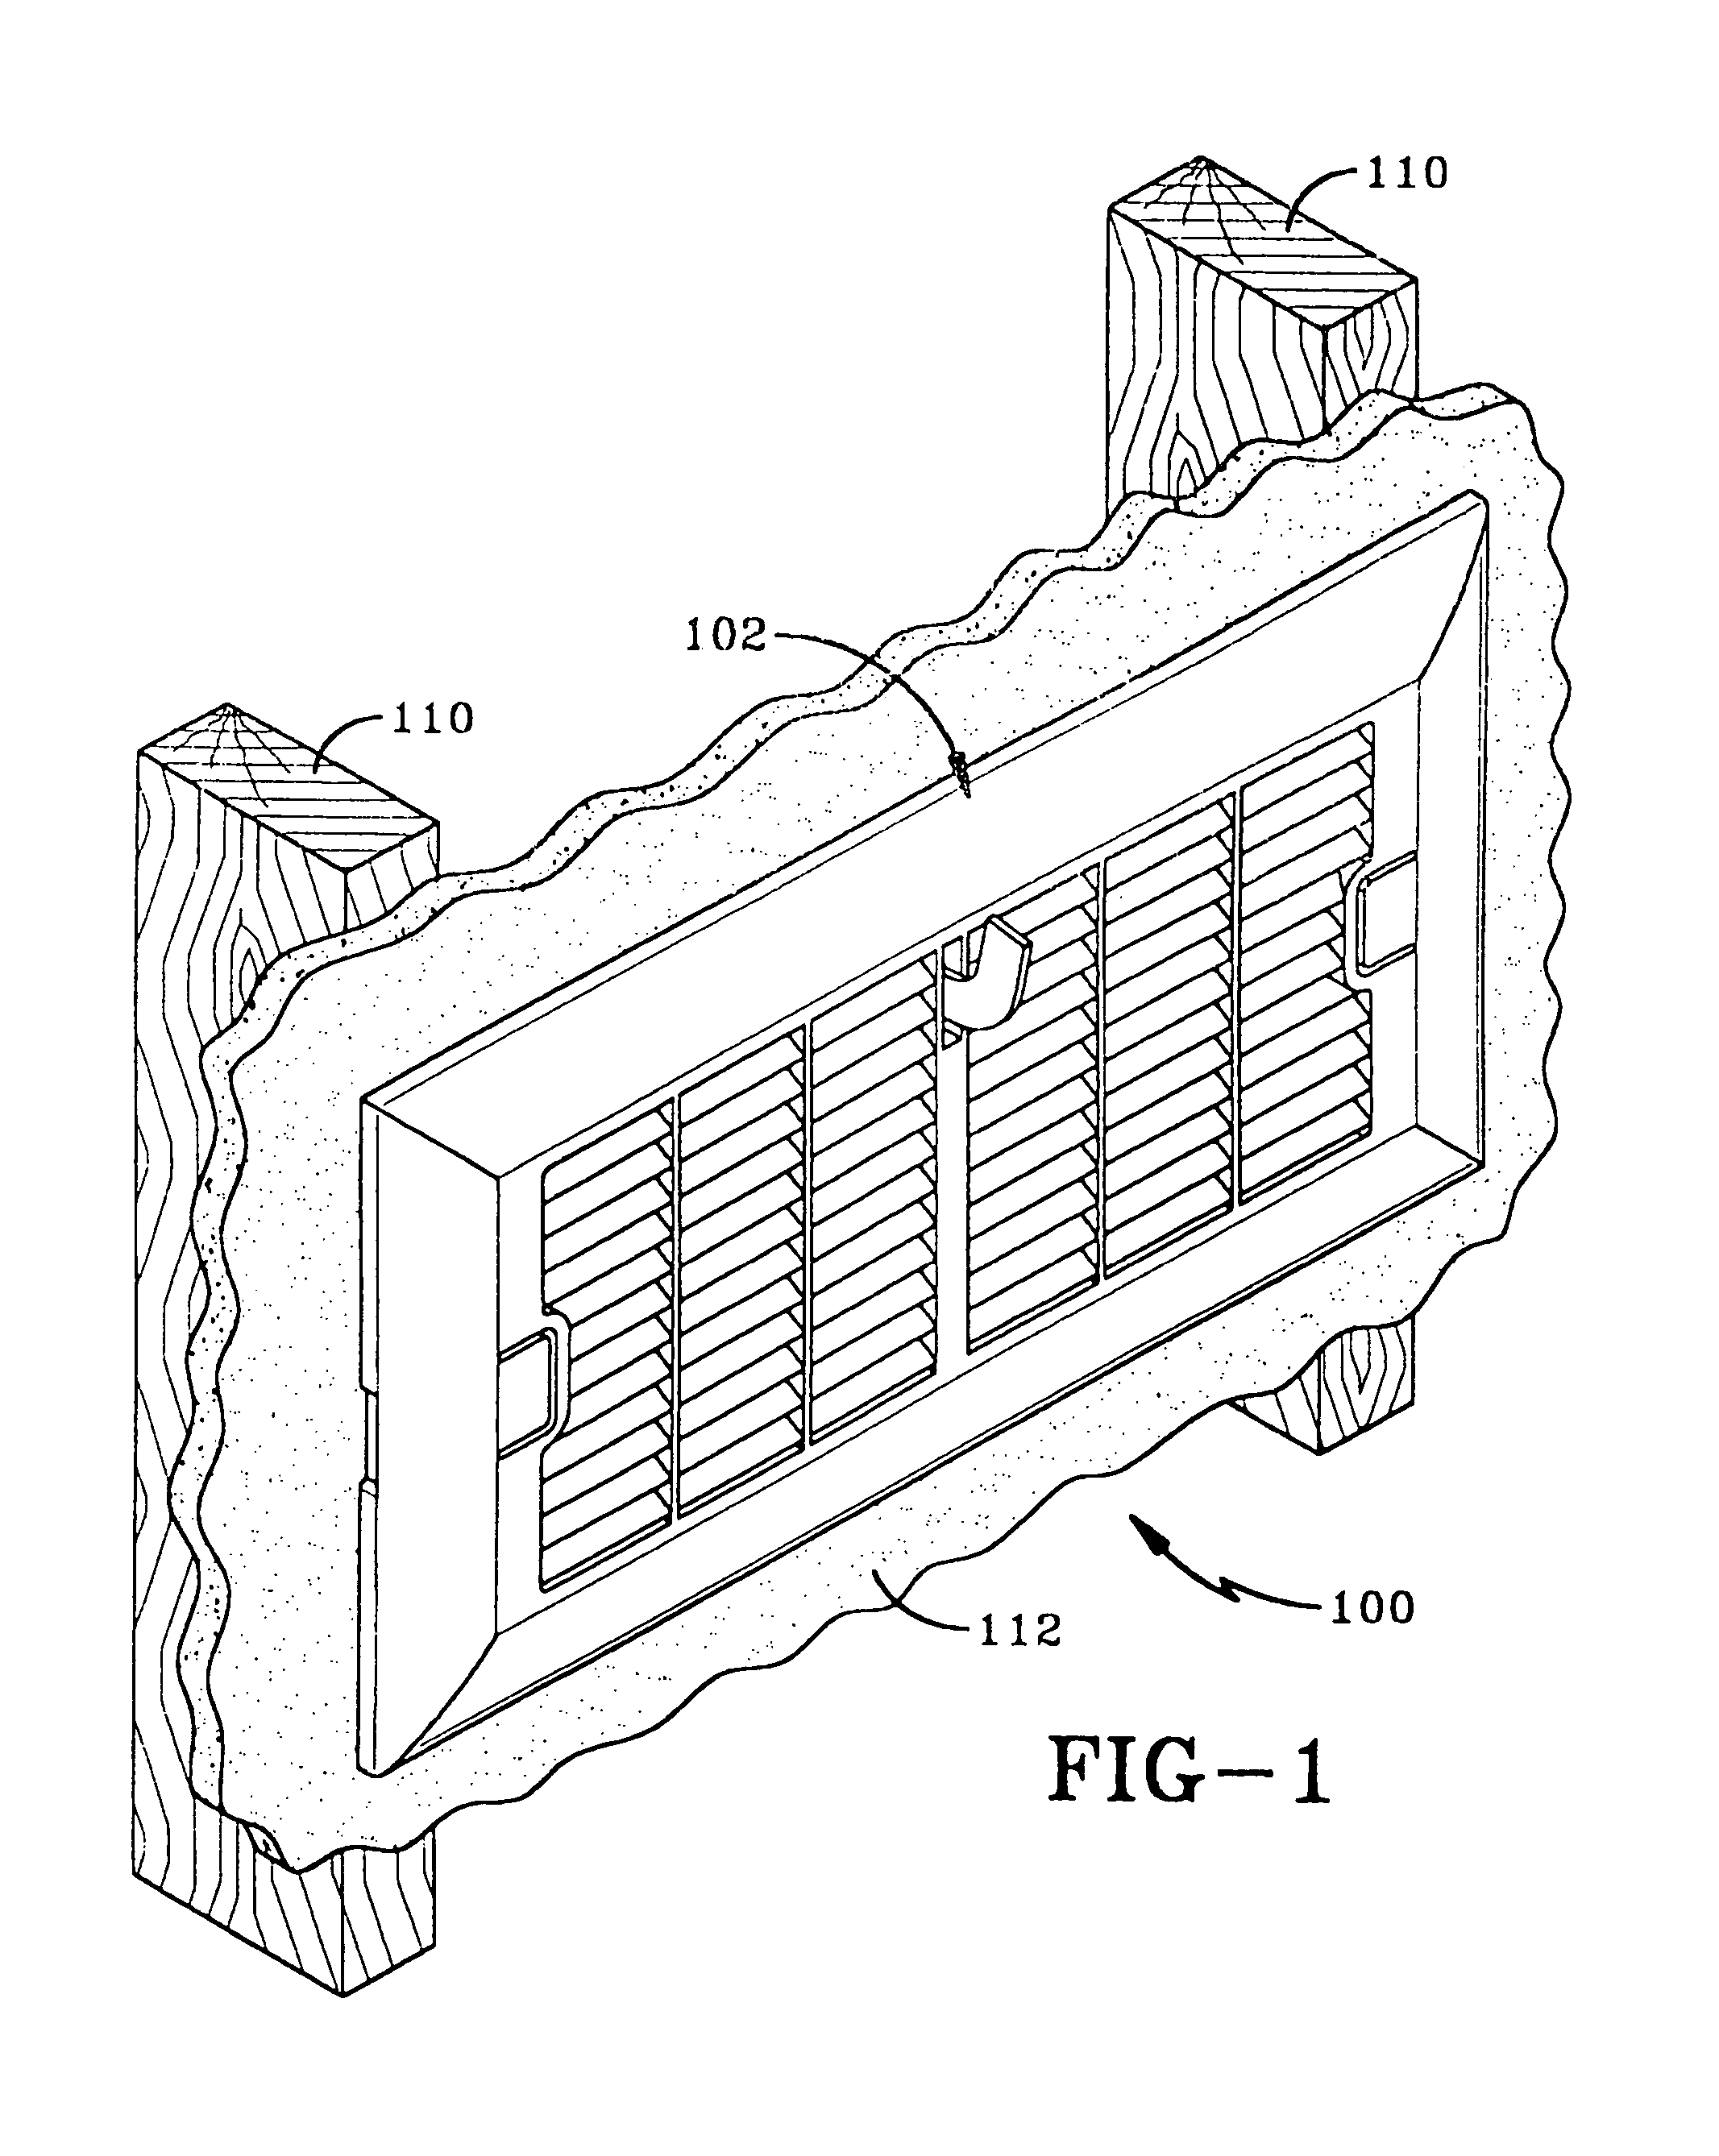 Register grille and connector frame with releasable connection